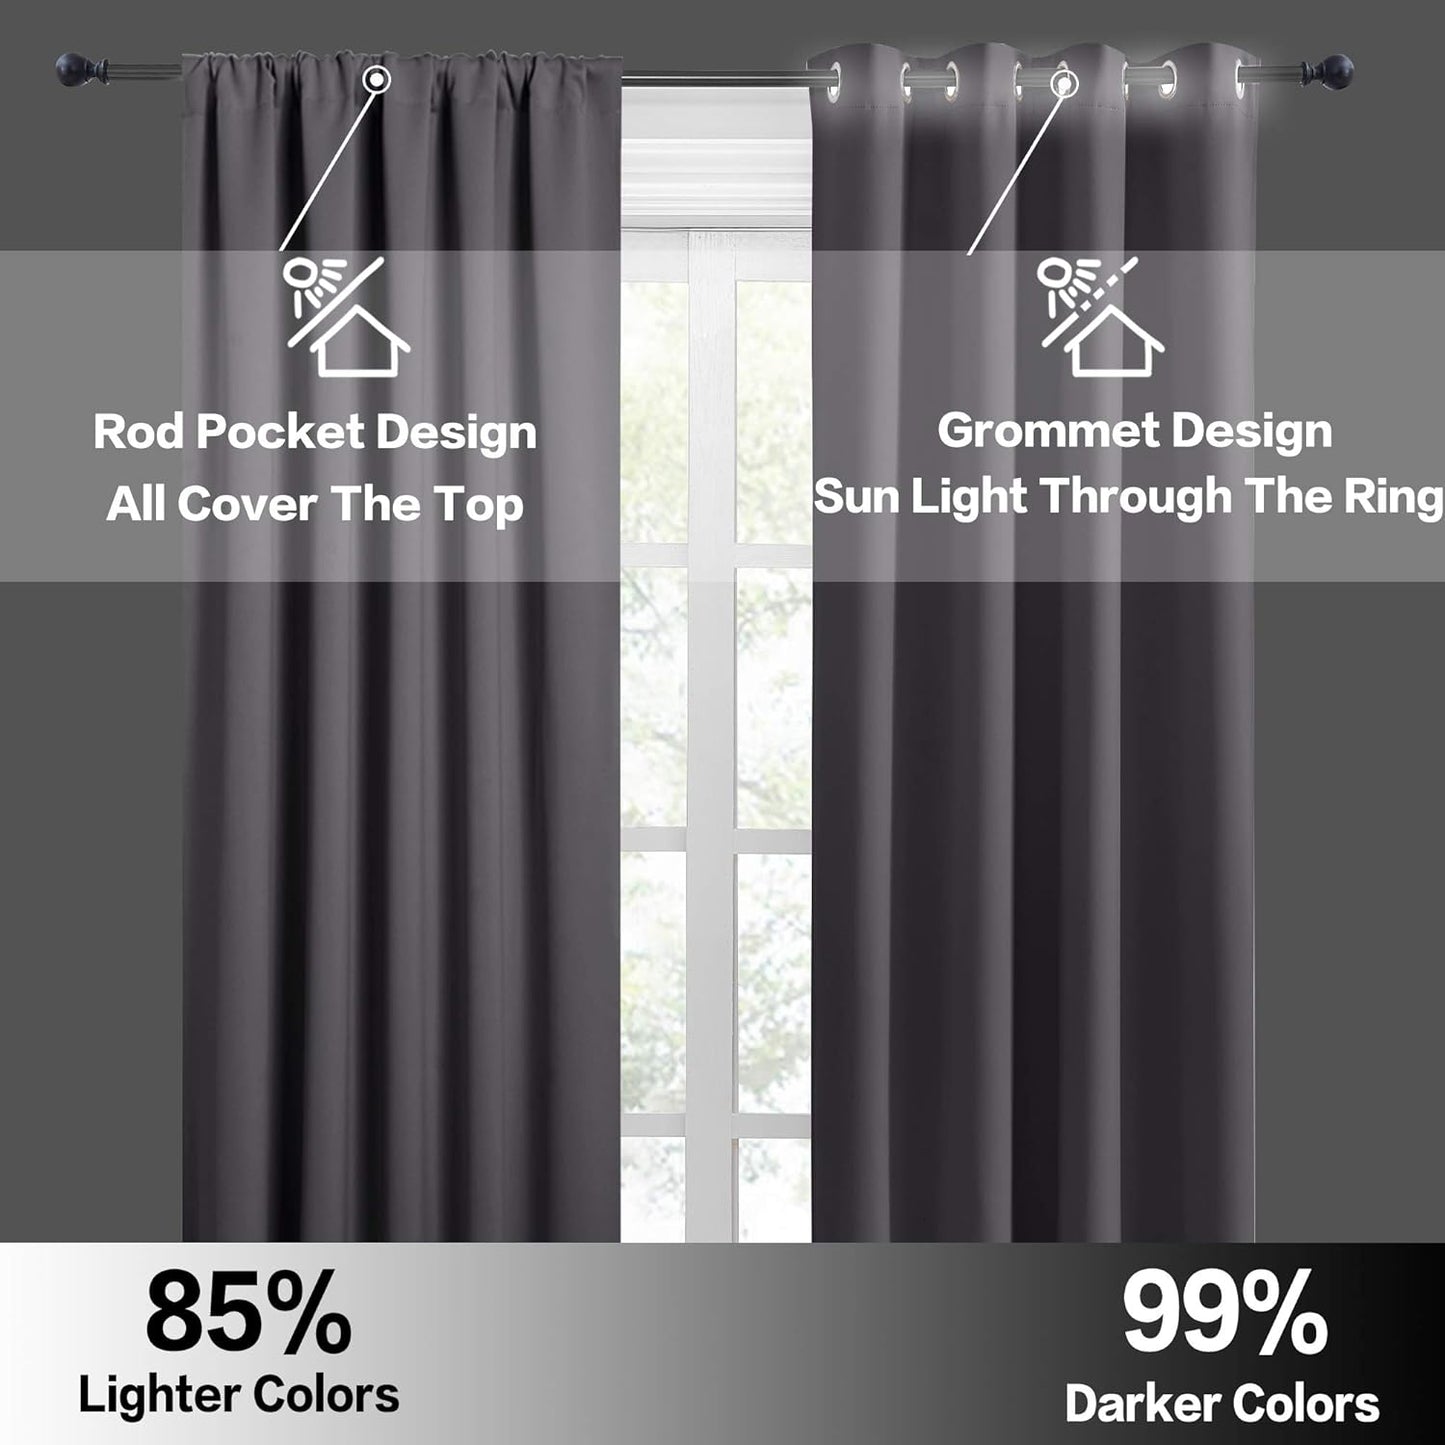 RYB HOME Blackout Curtains Thermal Insulated Panels Decor Slot Top Rod Pocket Blackout Drapes for Living Room Small Window Dressing Energy Saving & Room Darkening, 42 X 54, Grey, 2 Pieces  RYB HOME   